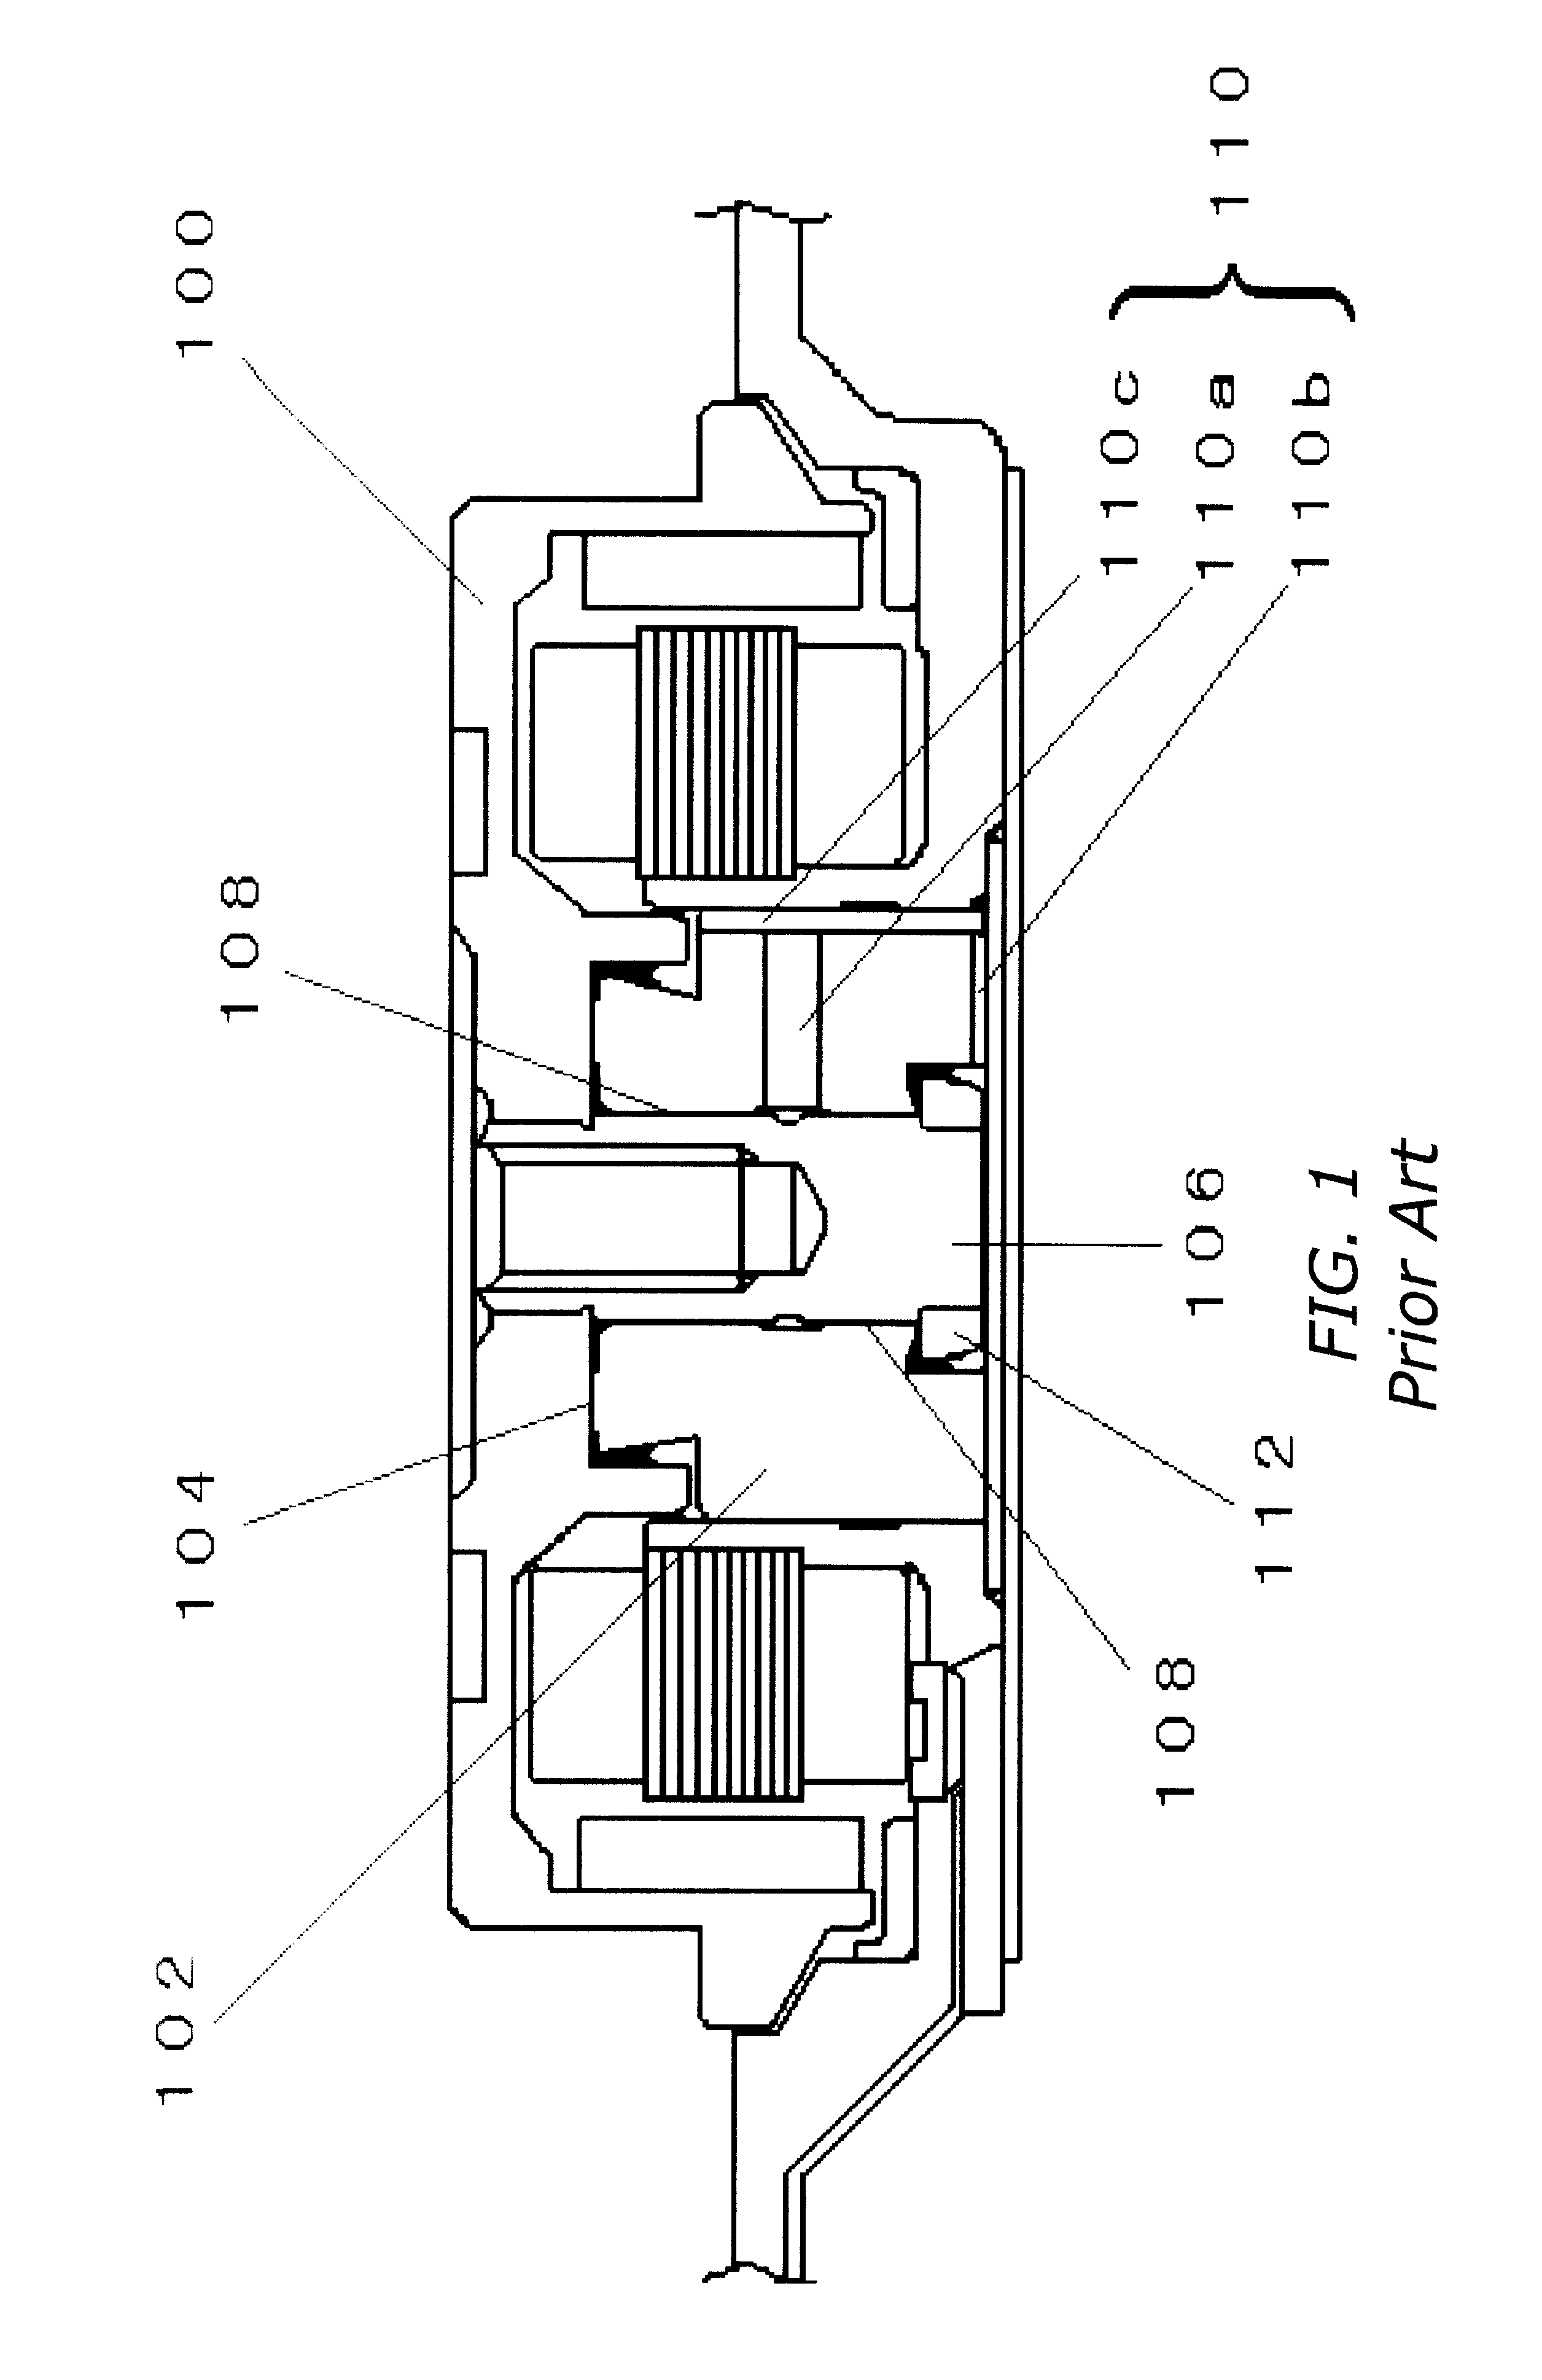 Spindle motor and disk drive utilizing the spindle motor